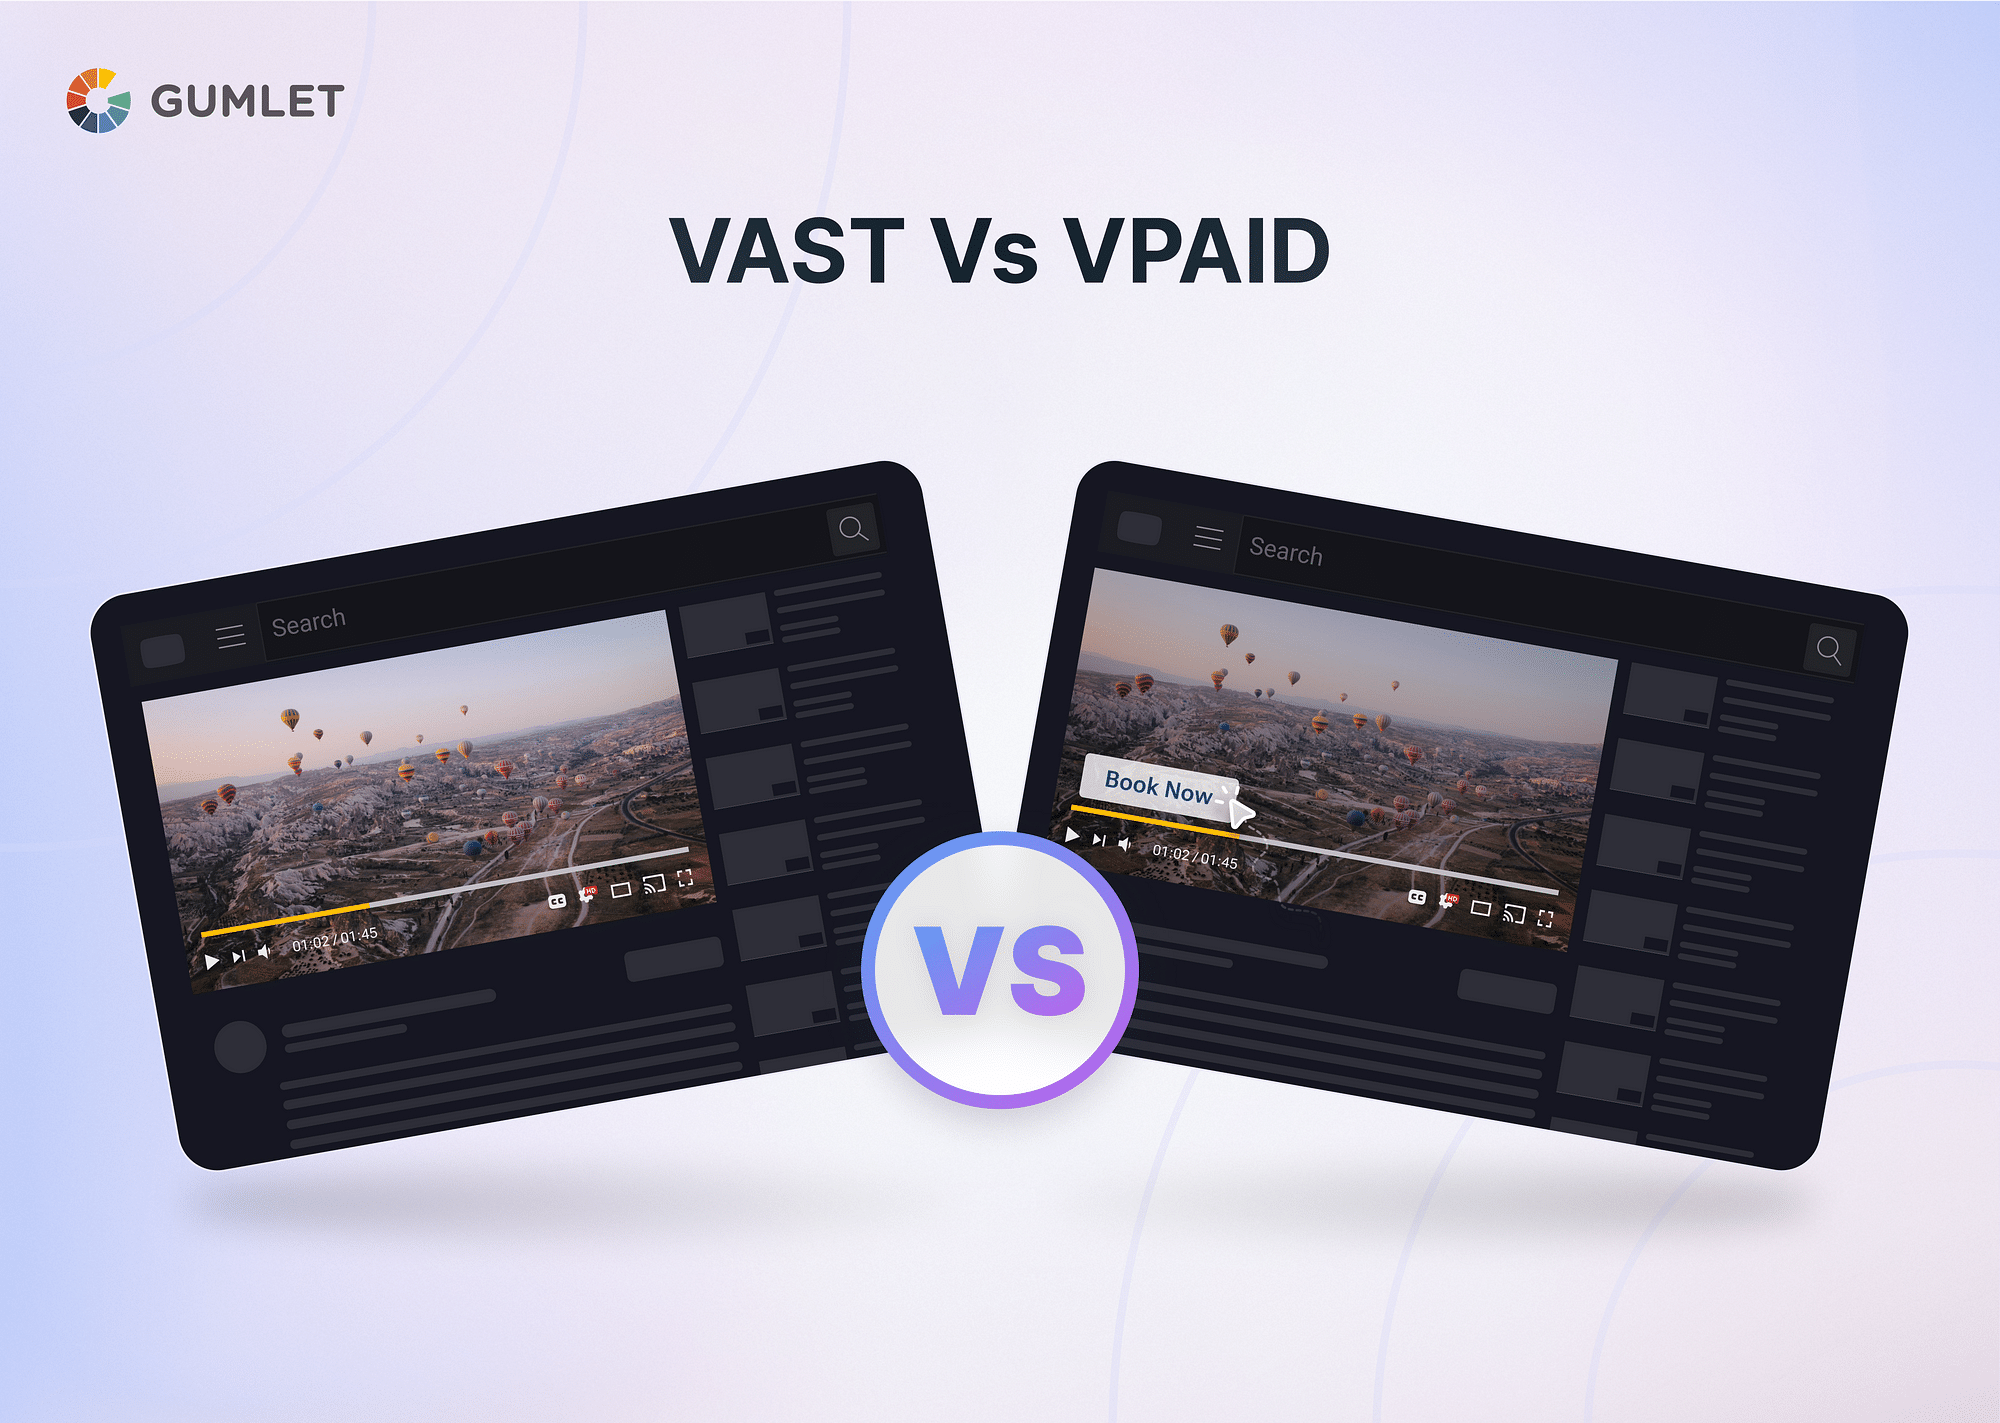 VAST vs VPAID: Difference Between VAST and VPAID